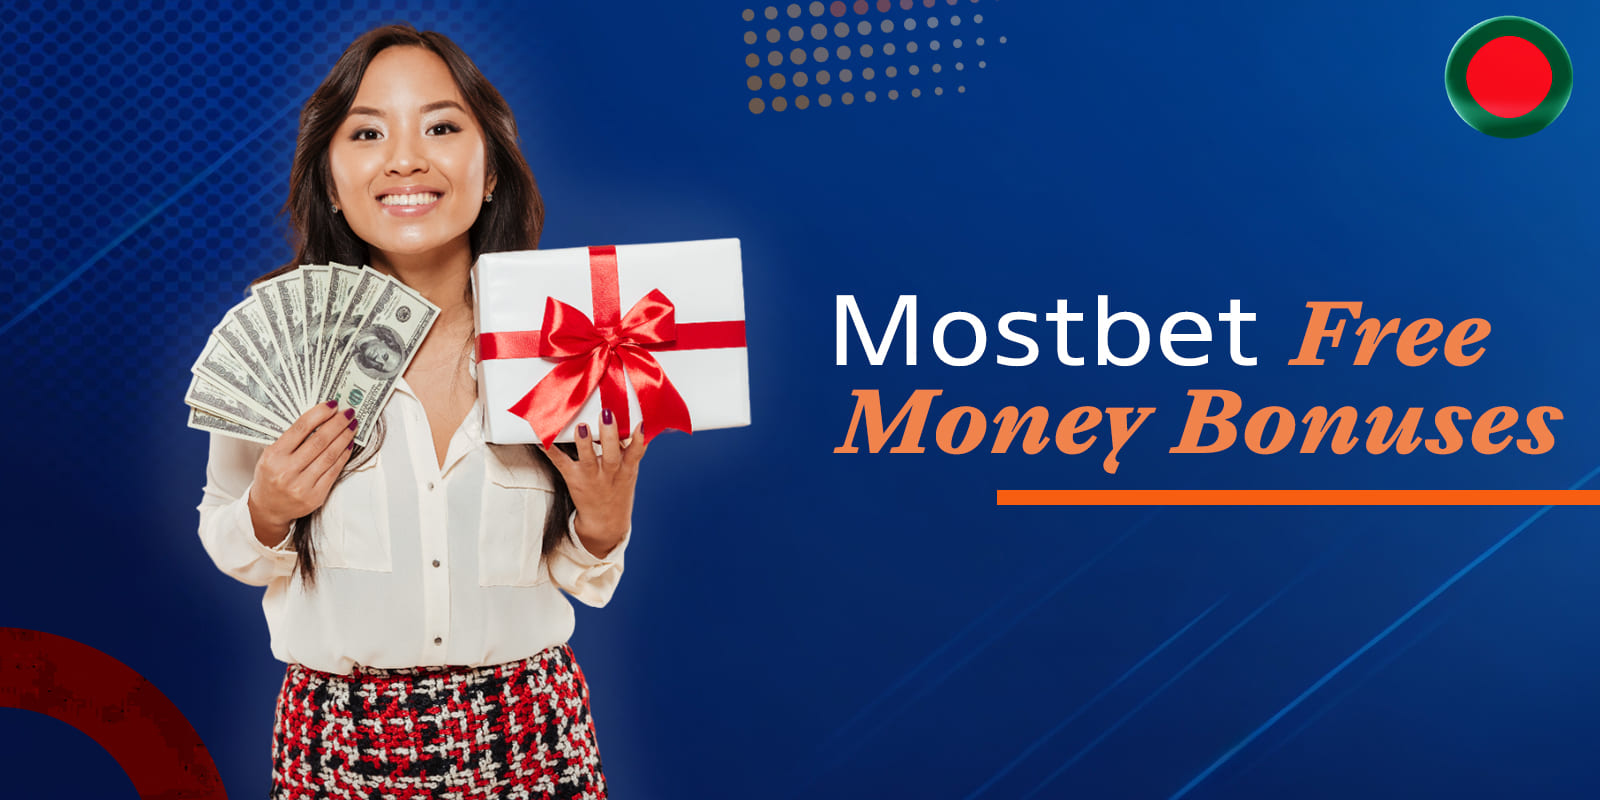 Free cash bonuses from Mostbet